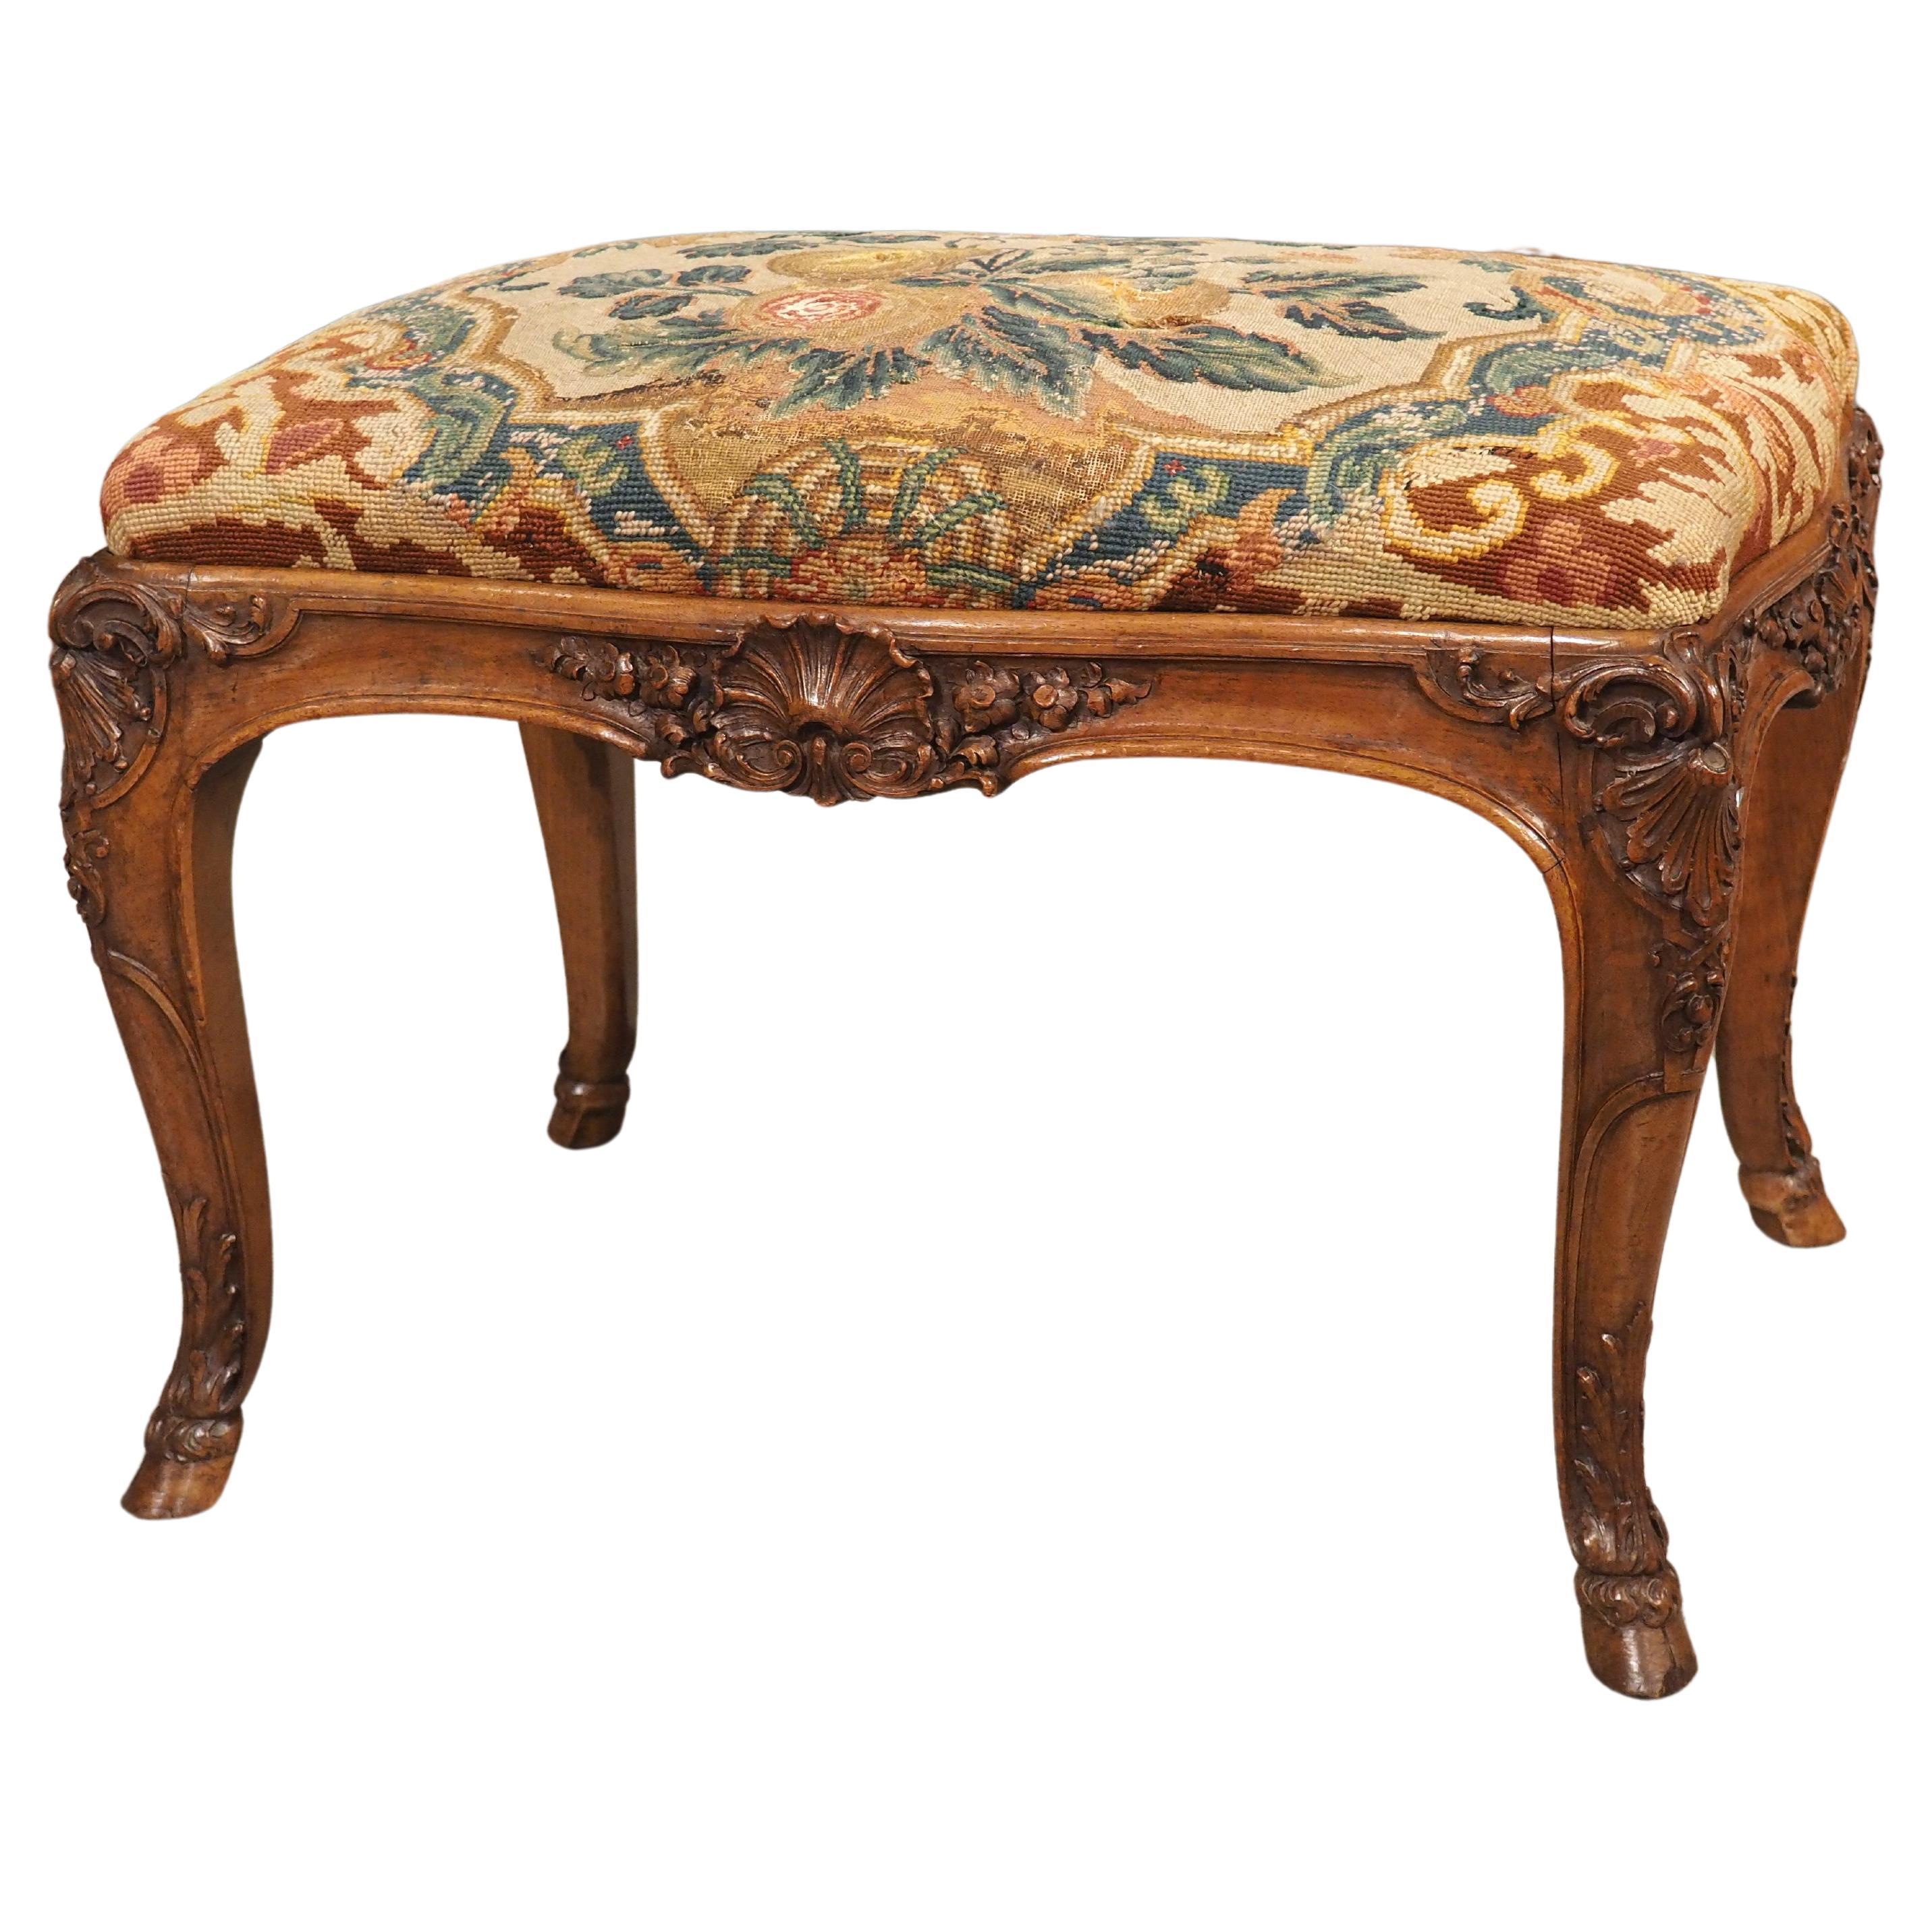 19th Century Regence Tabouret in Carved Walnut by A. Dubois, Le Mans, France For Sale